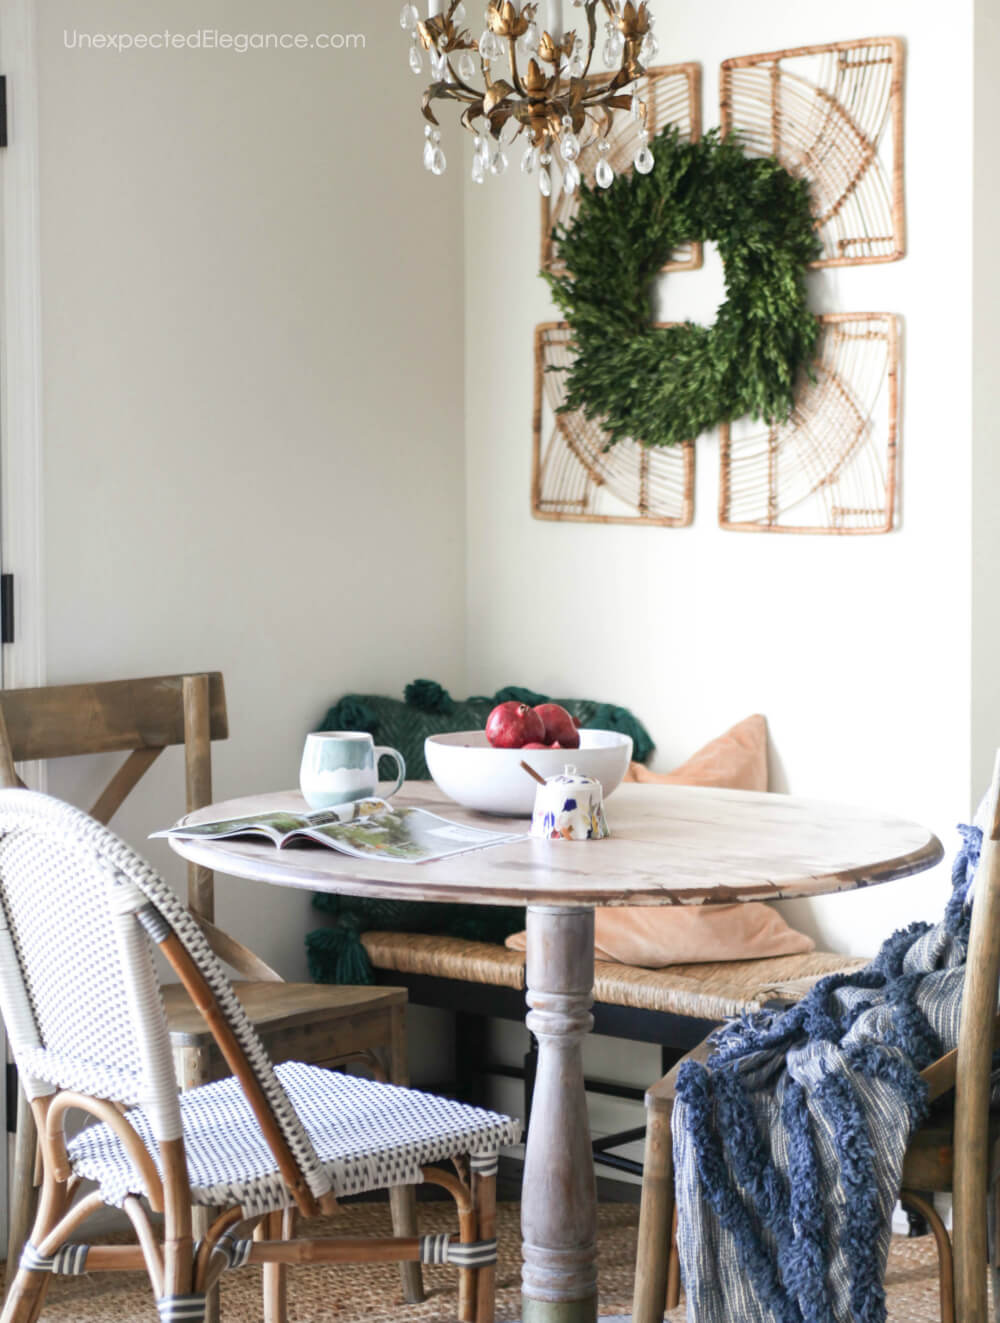 Quick and easy Christmas decor ideas.